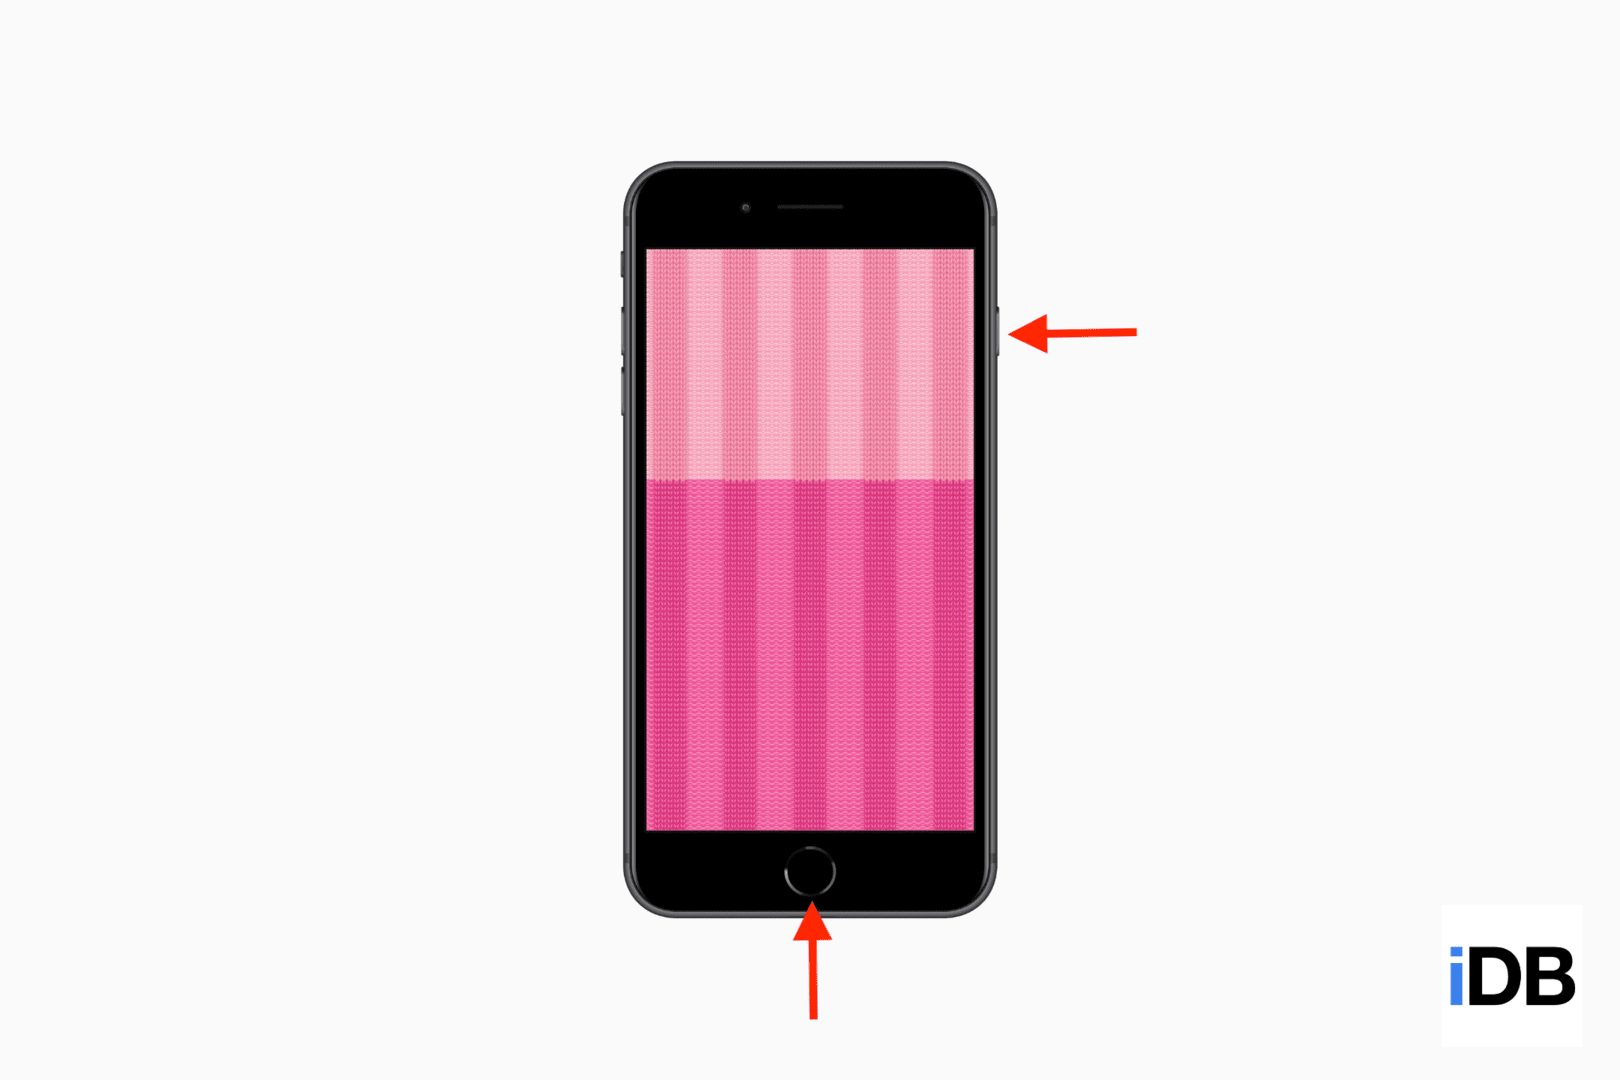 A mockup of iPhone with Home button showing arrows pointing the buttons to take a screenshot